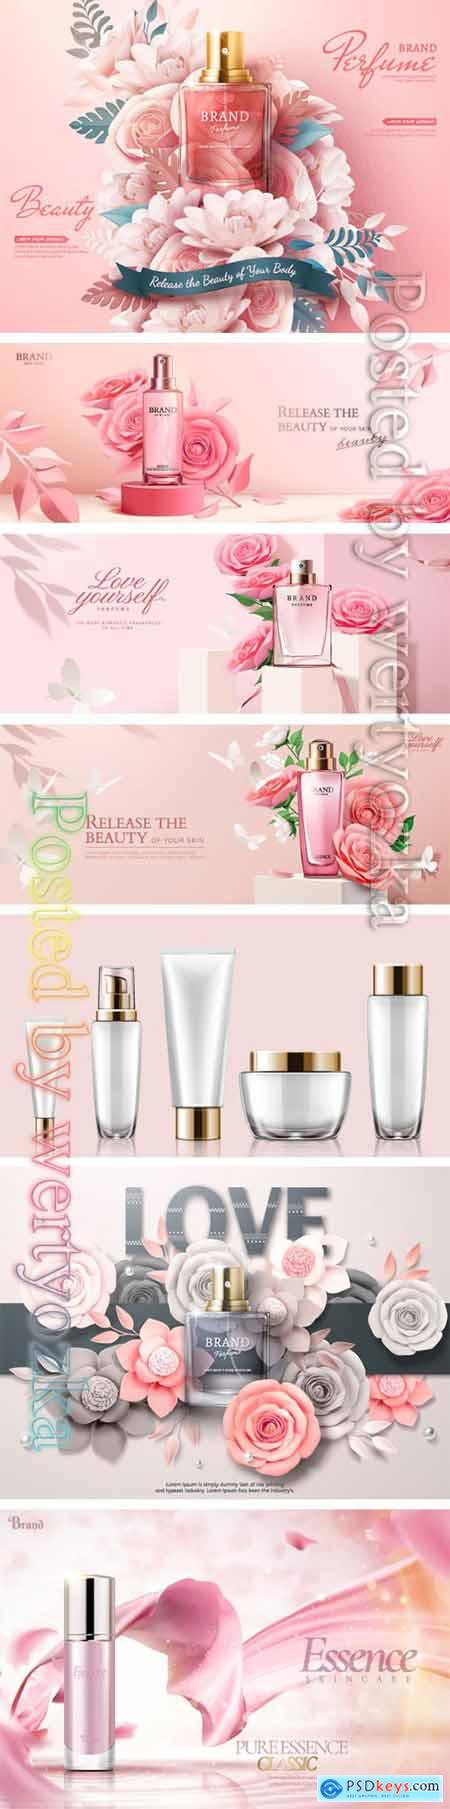 Make up and skincare packaging vector template # 6